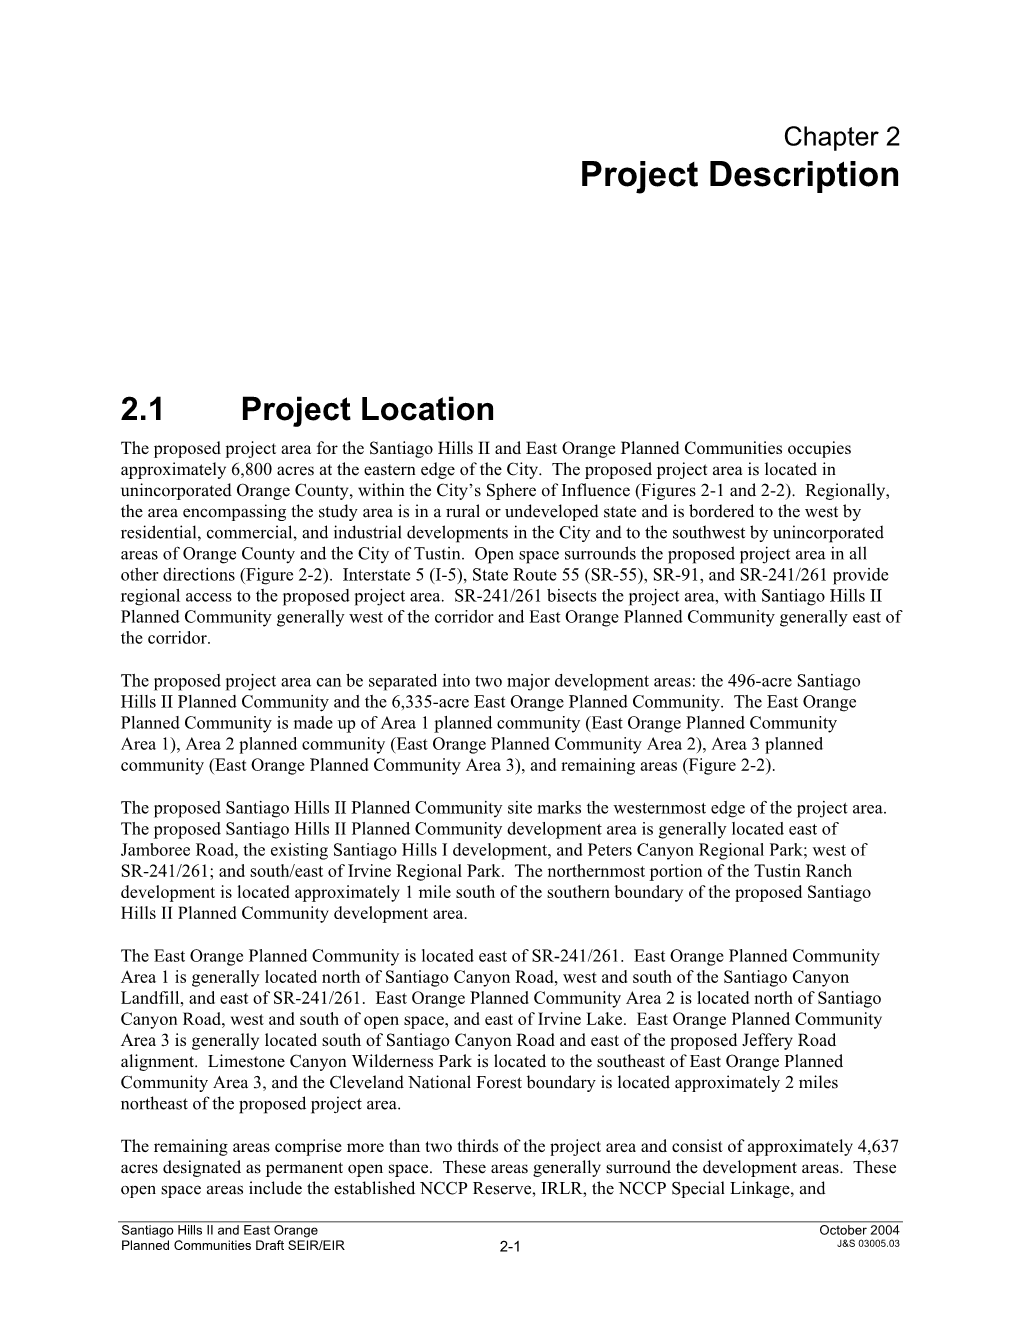 Volume I of the Irvine Company Application Page 1